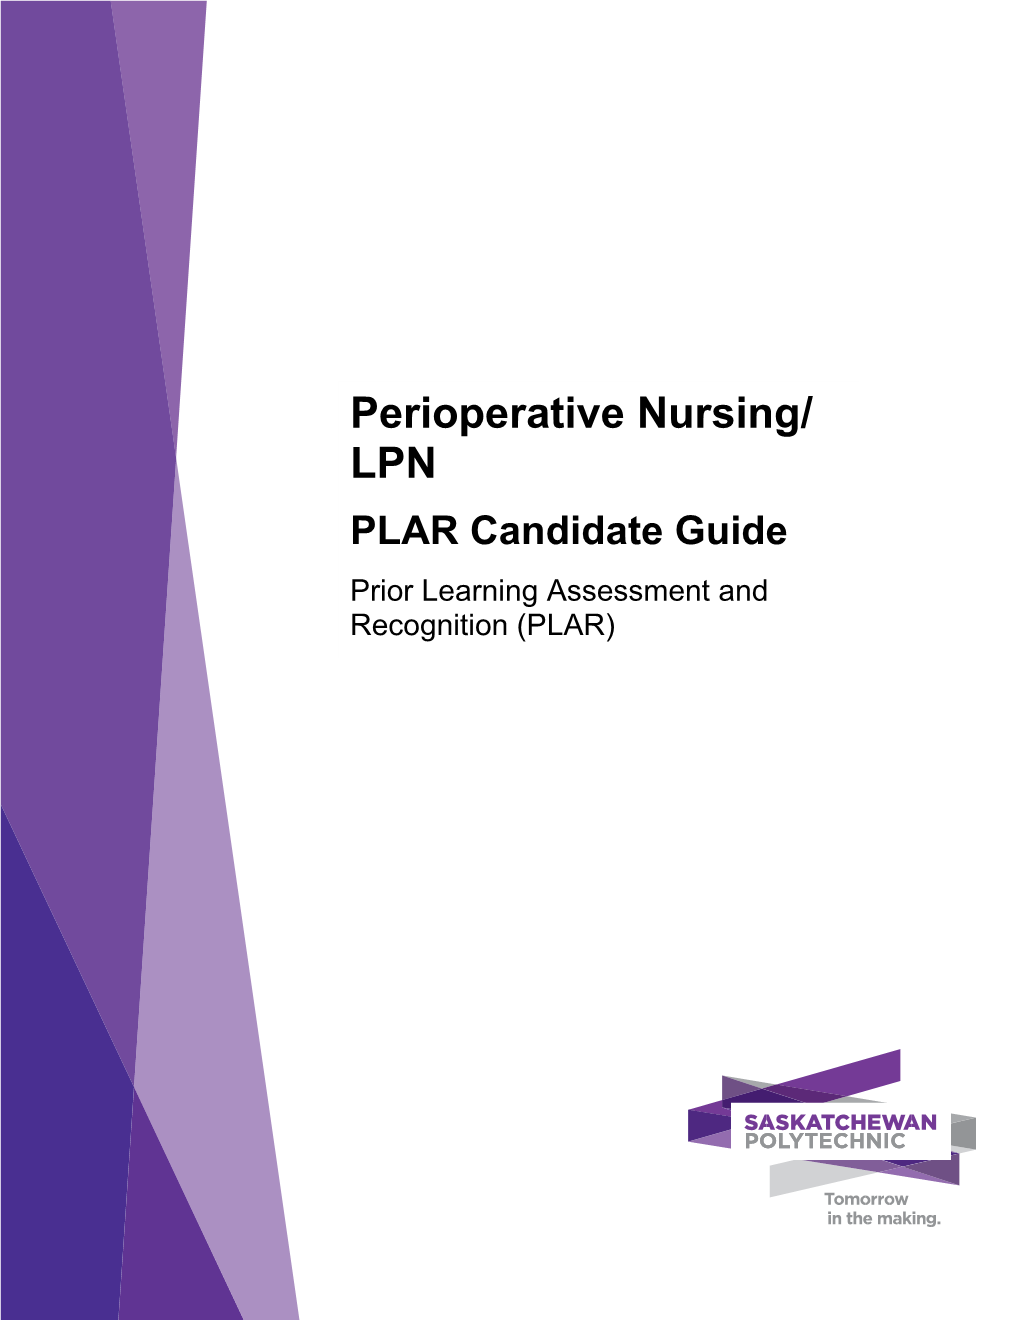 Perioperative Nursing/ LPN PLAR Candidate Guide Prior Learning Assessment and Recognition (PLAR)